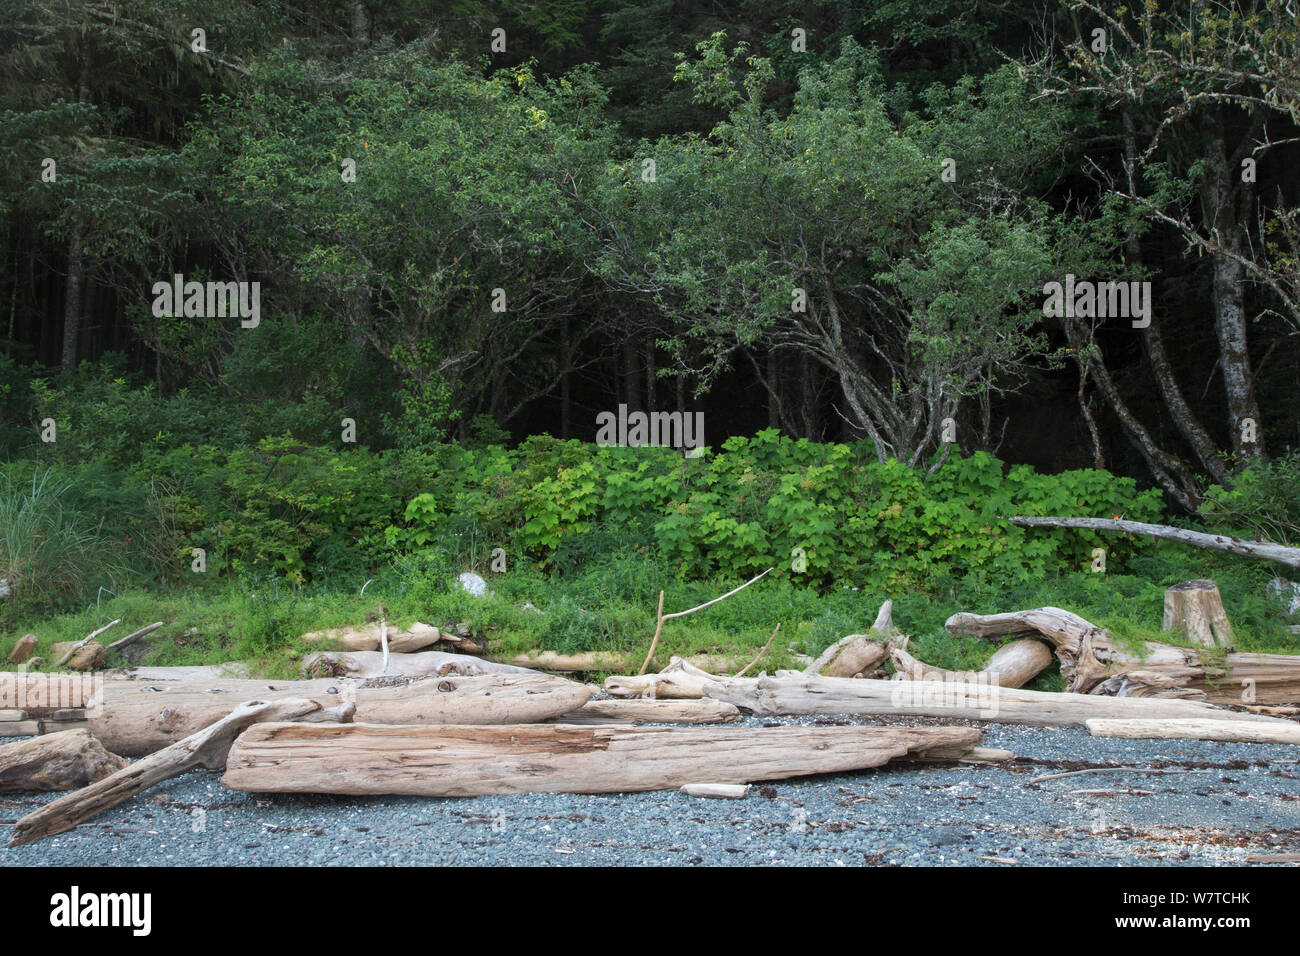 Driftwood piled at the edge of a rocky beach, Vancouver Island, British Columbia, Canada, August. Stock Photo